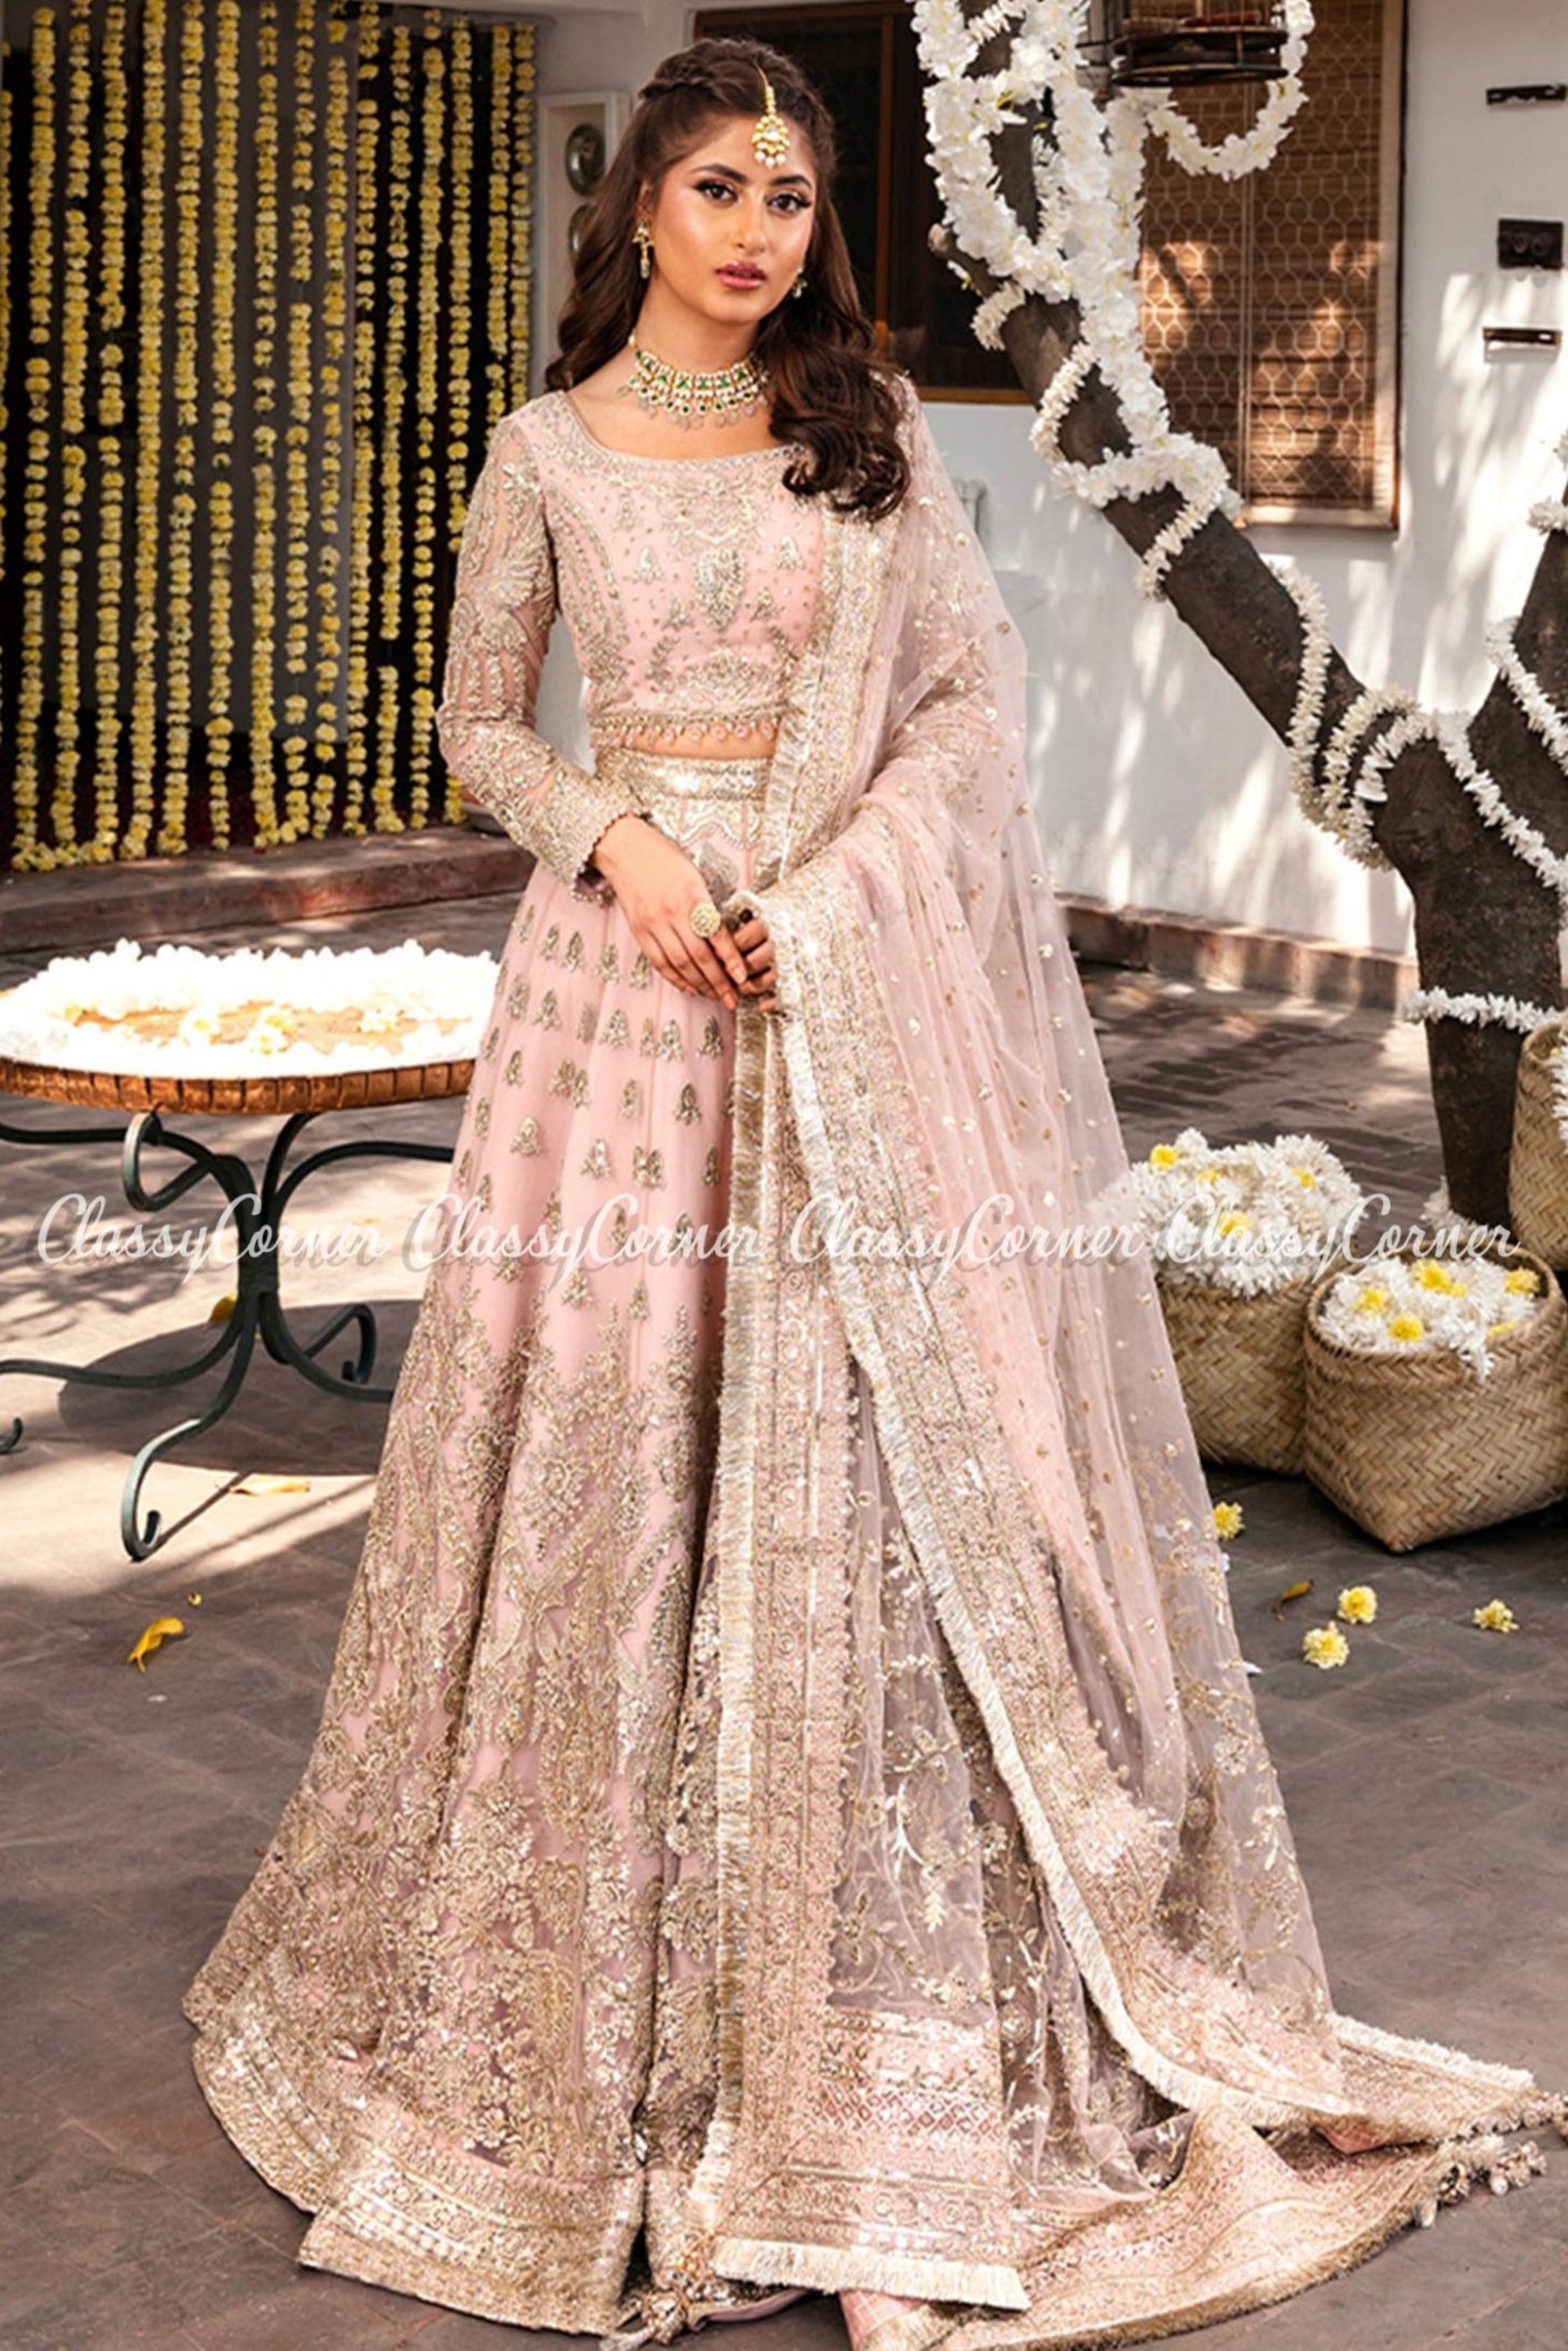 Wedding Wear Light Pink And Silver Chanderi Embroidered Lehenga Choli at Rs  6500 in Jaipur